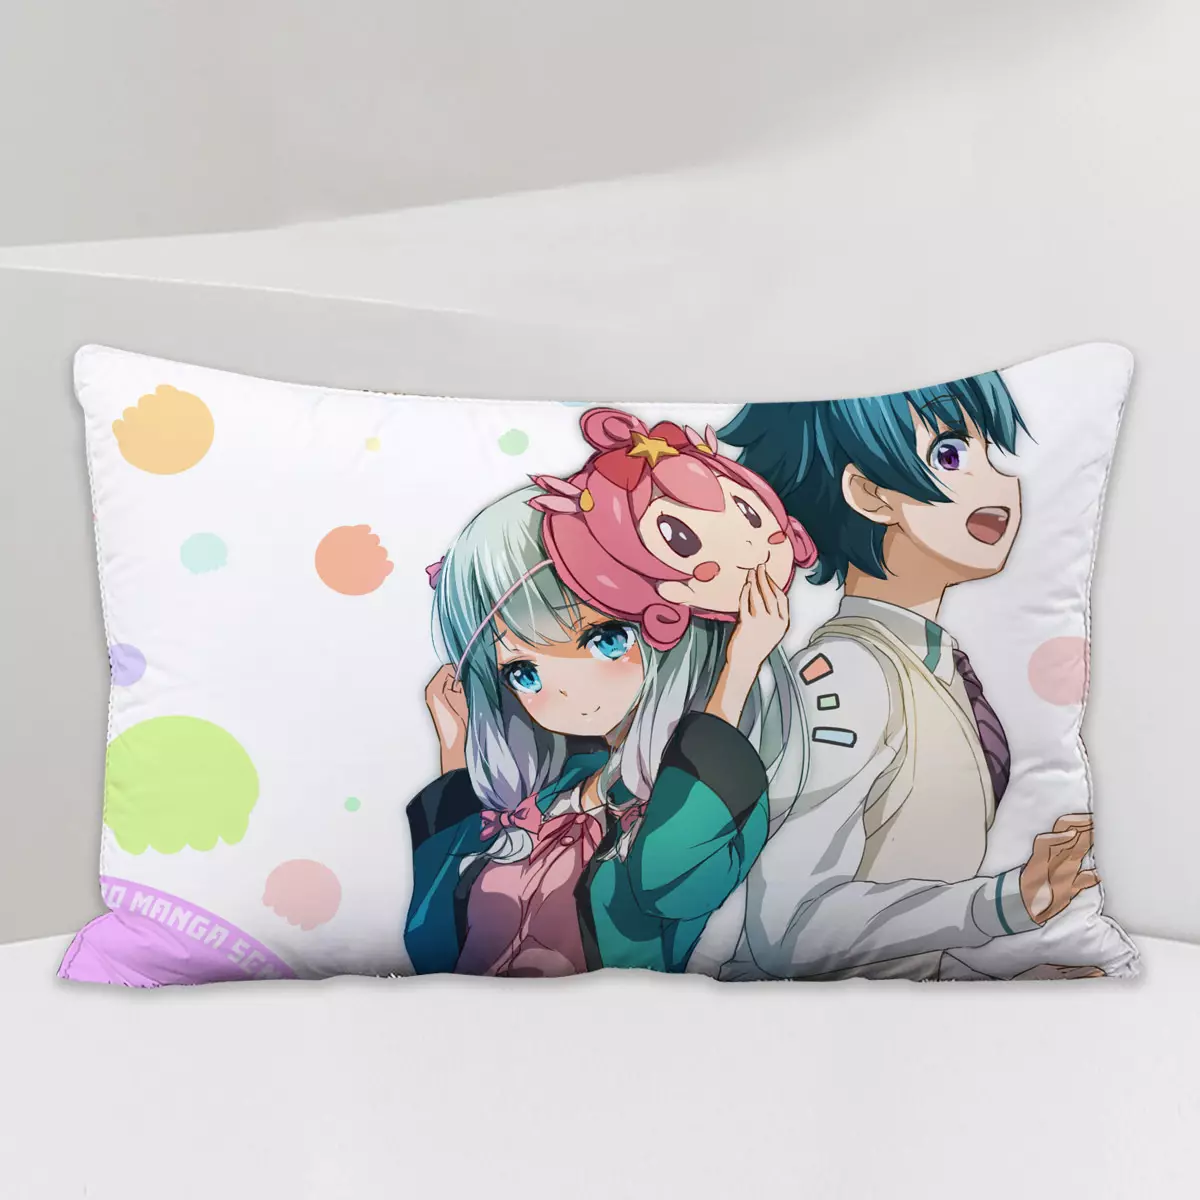 Anime-pillows: Dakimakur hug in full length, long big pillows with a print of girls and other characters 20757_21